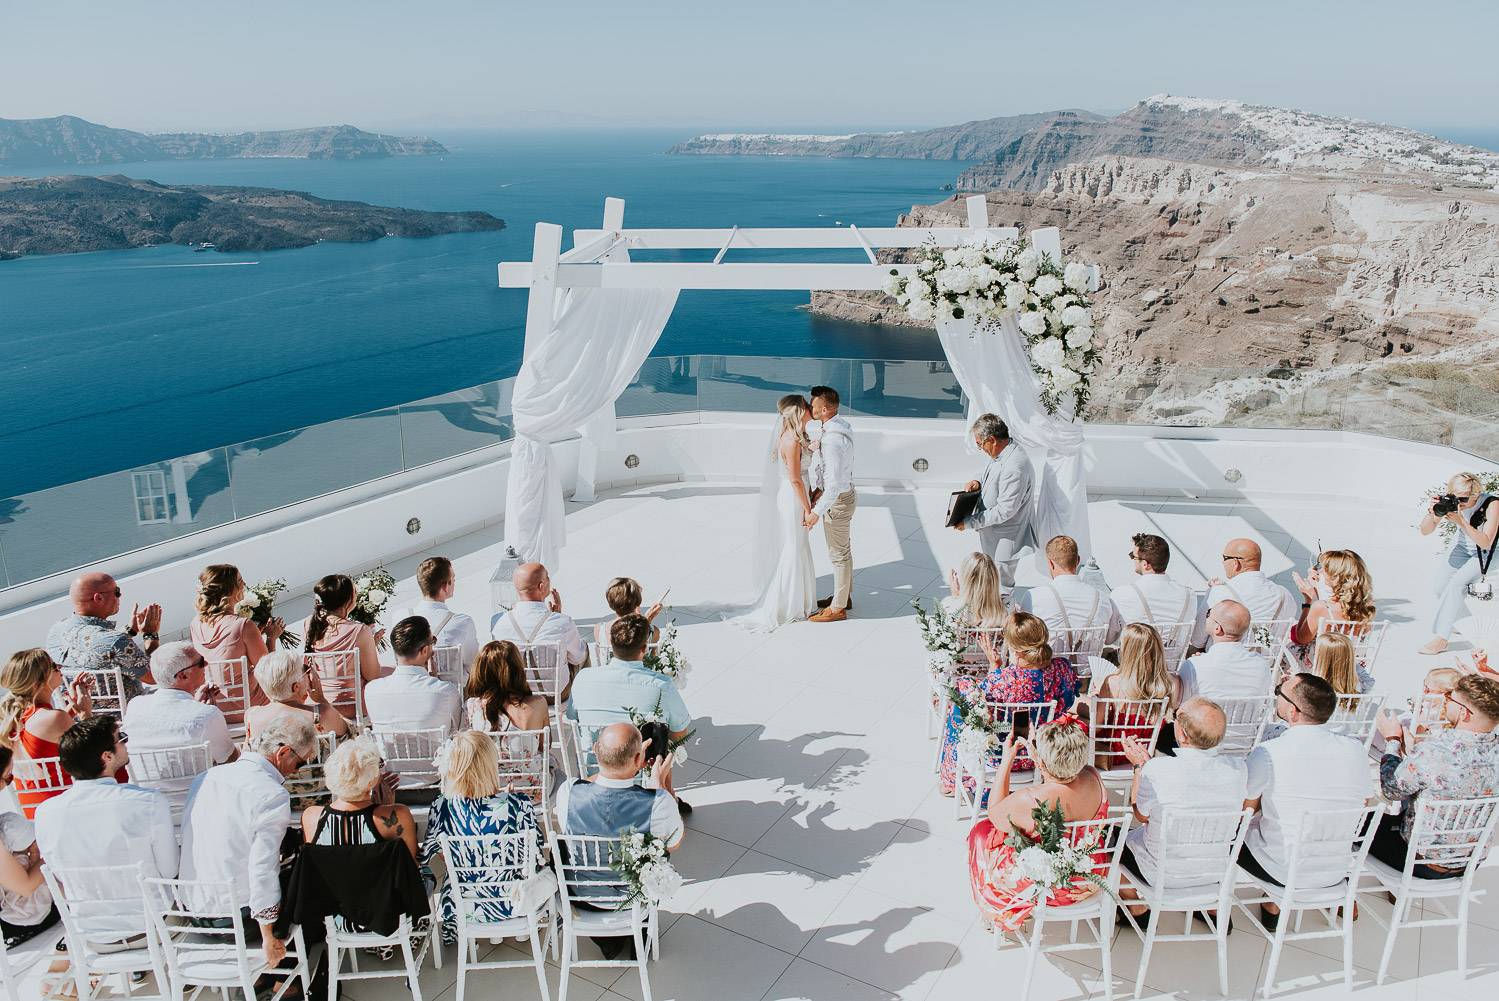 Wedding photographer Santorini: panoramic photo of bride and groom kissing under the gazebo with caldera and the sea in the background by Ben and Vesna.